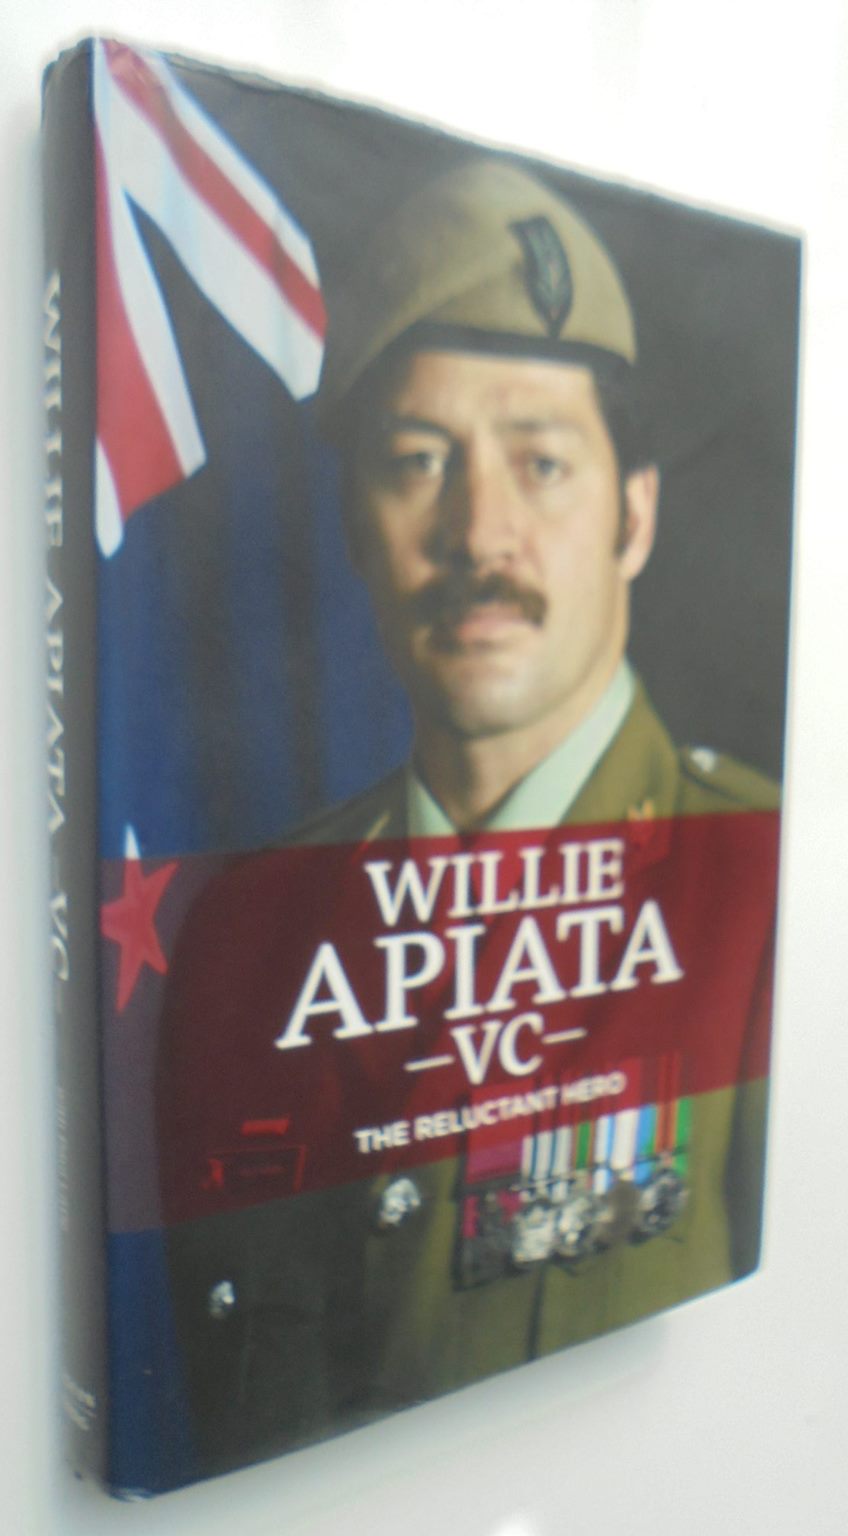 Willie Apiata VC: The Reluctant Hero. SIGNED by Apiata